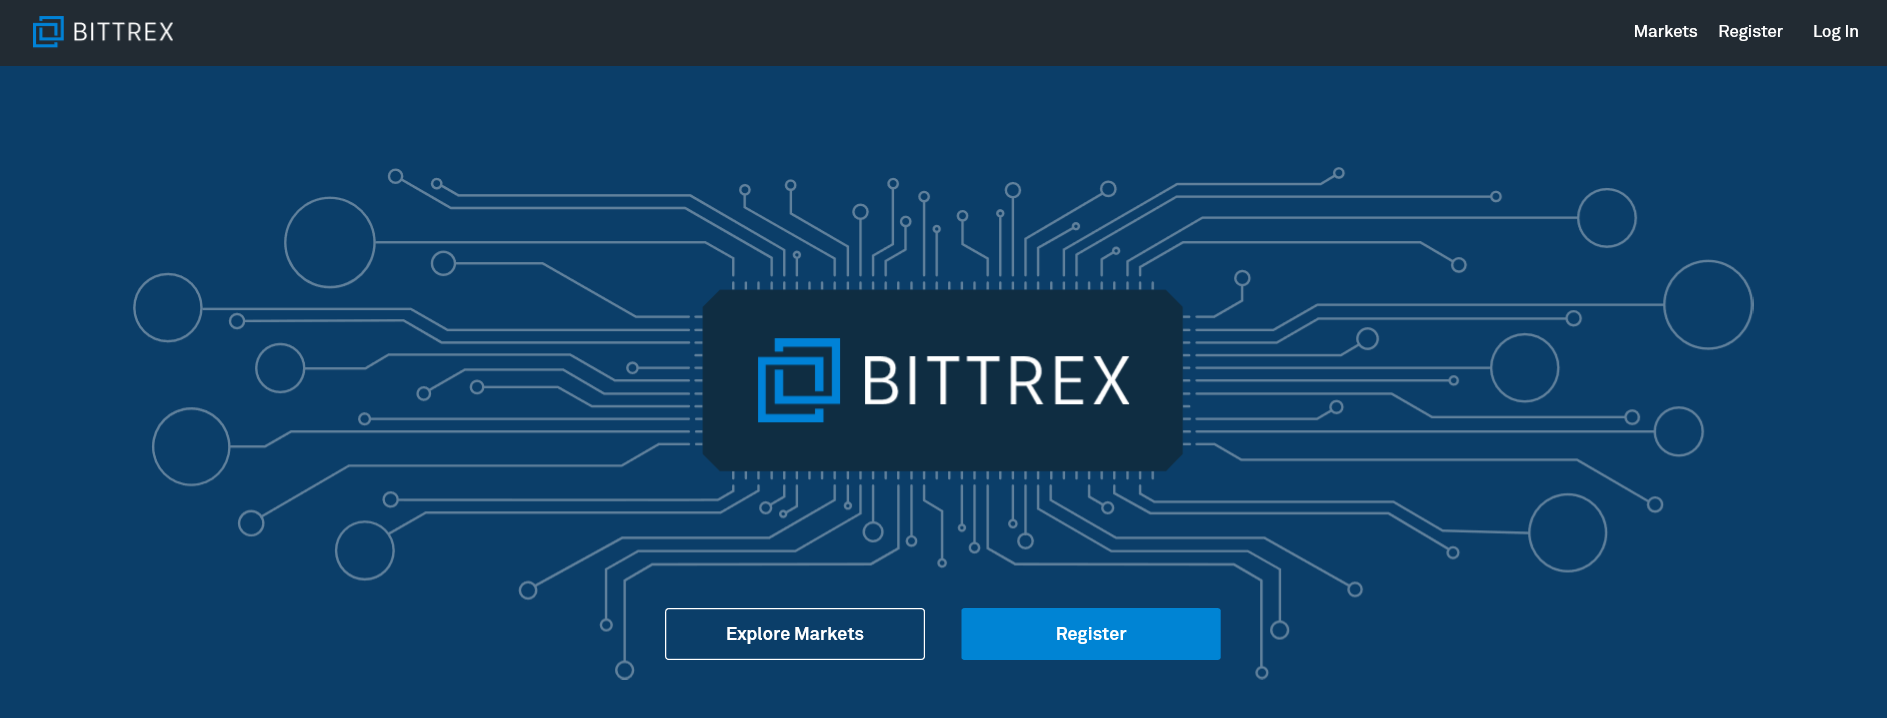 bittrex-new.PNG